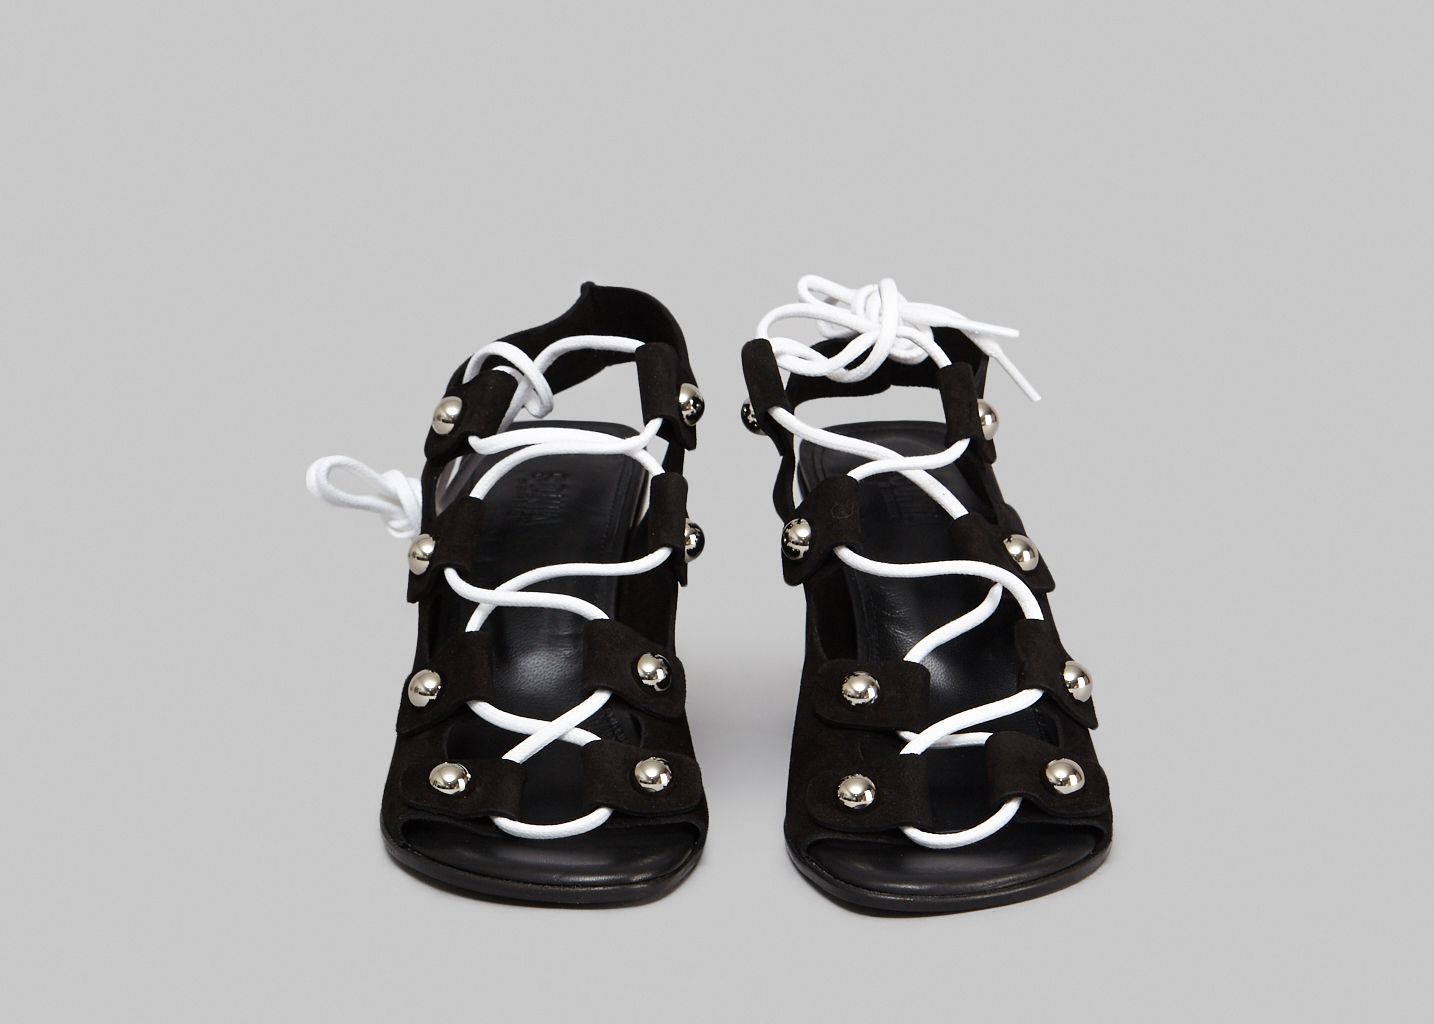 Rivet Sandals - Sonia By